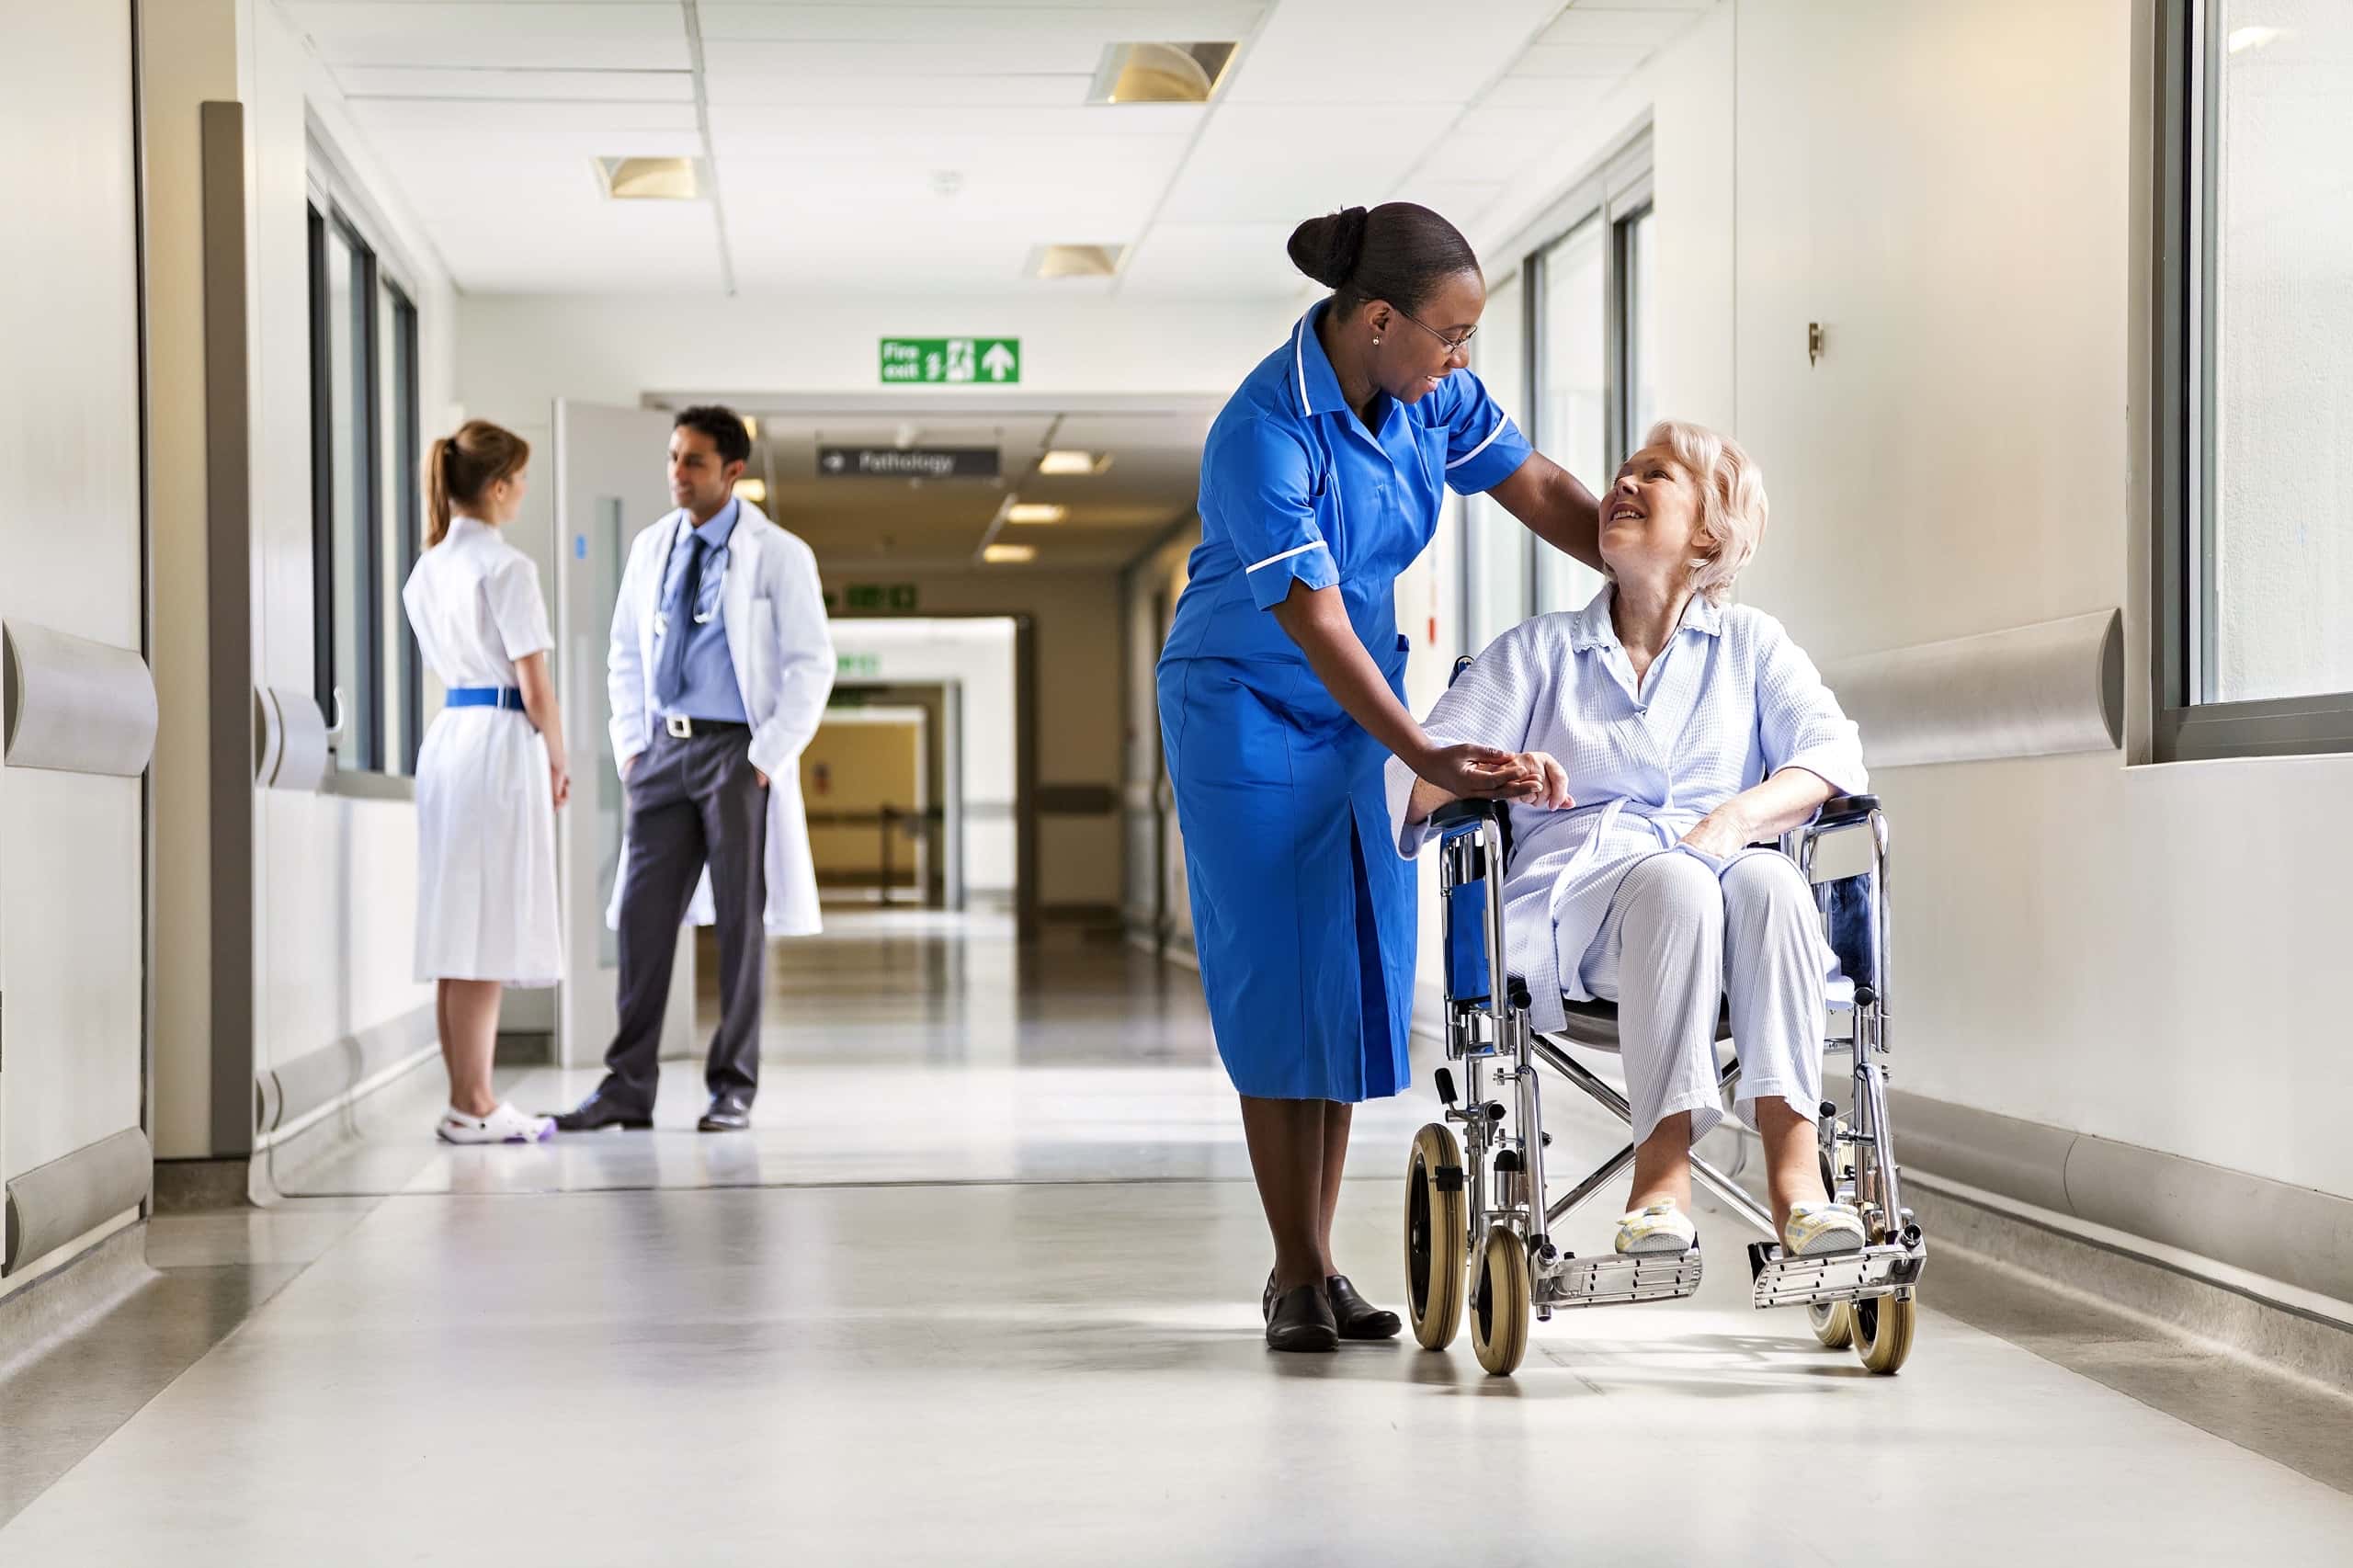 A nurse pushing a patient in a wheelchair, symbolizing Fast Fixx's commitment to optimizing healthcare operations